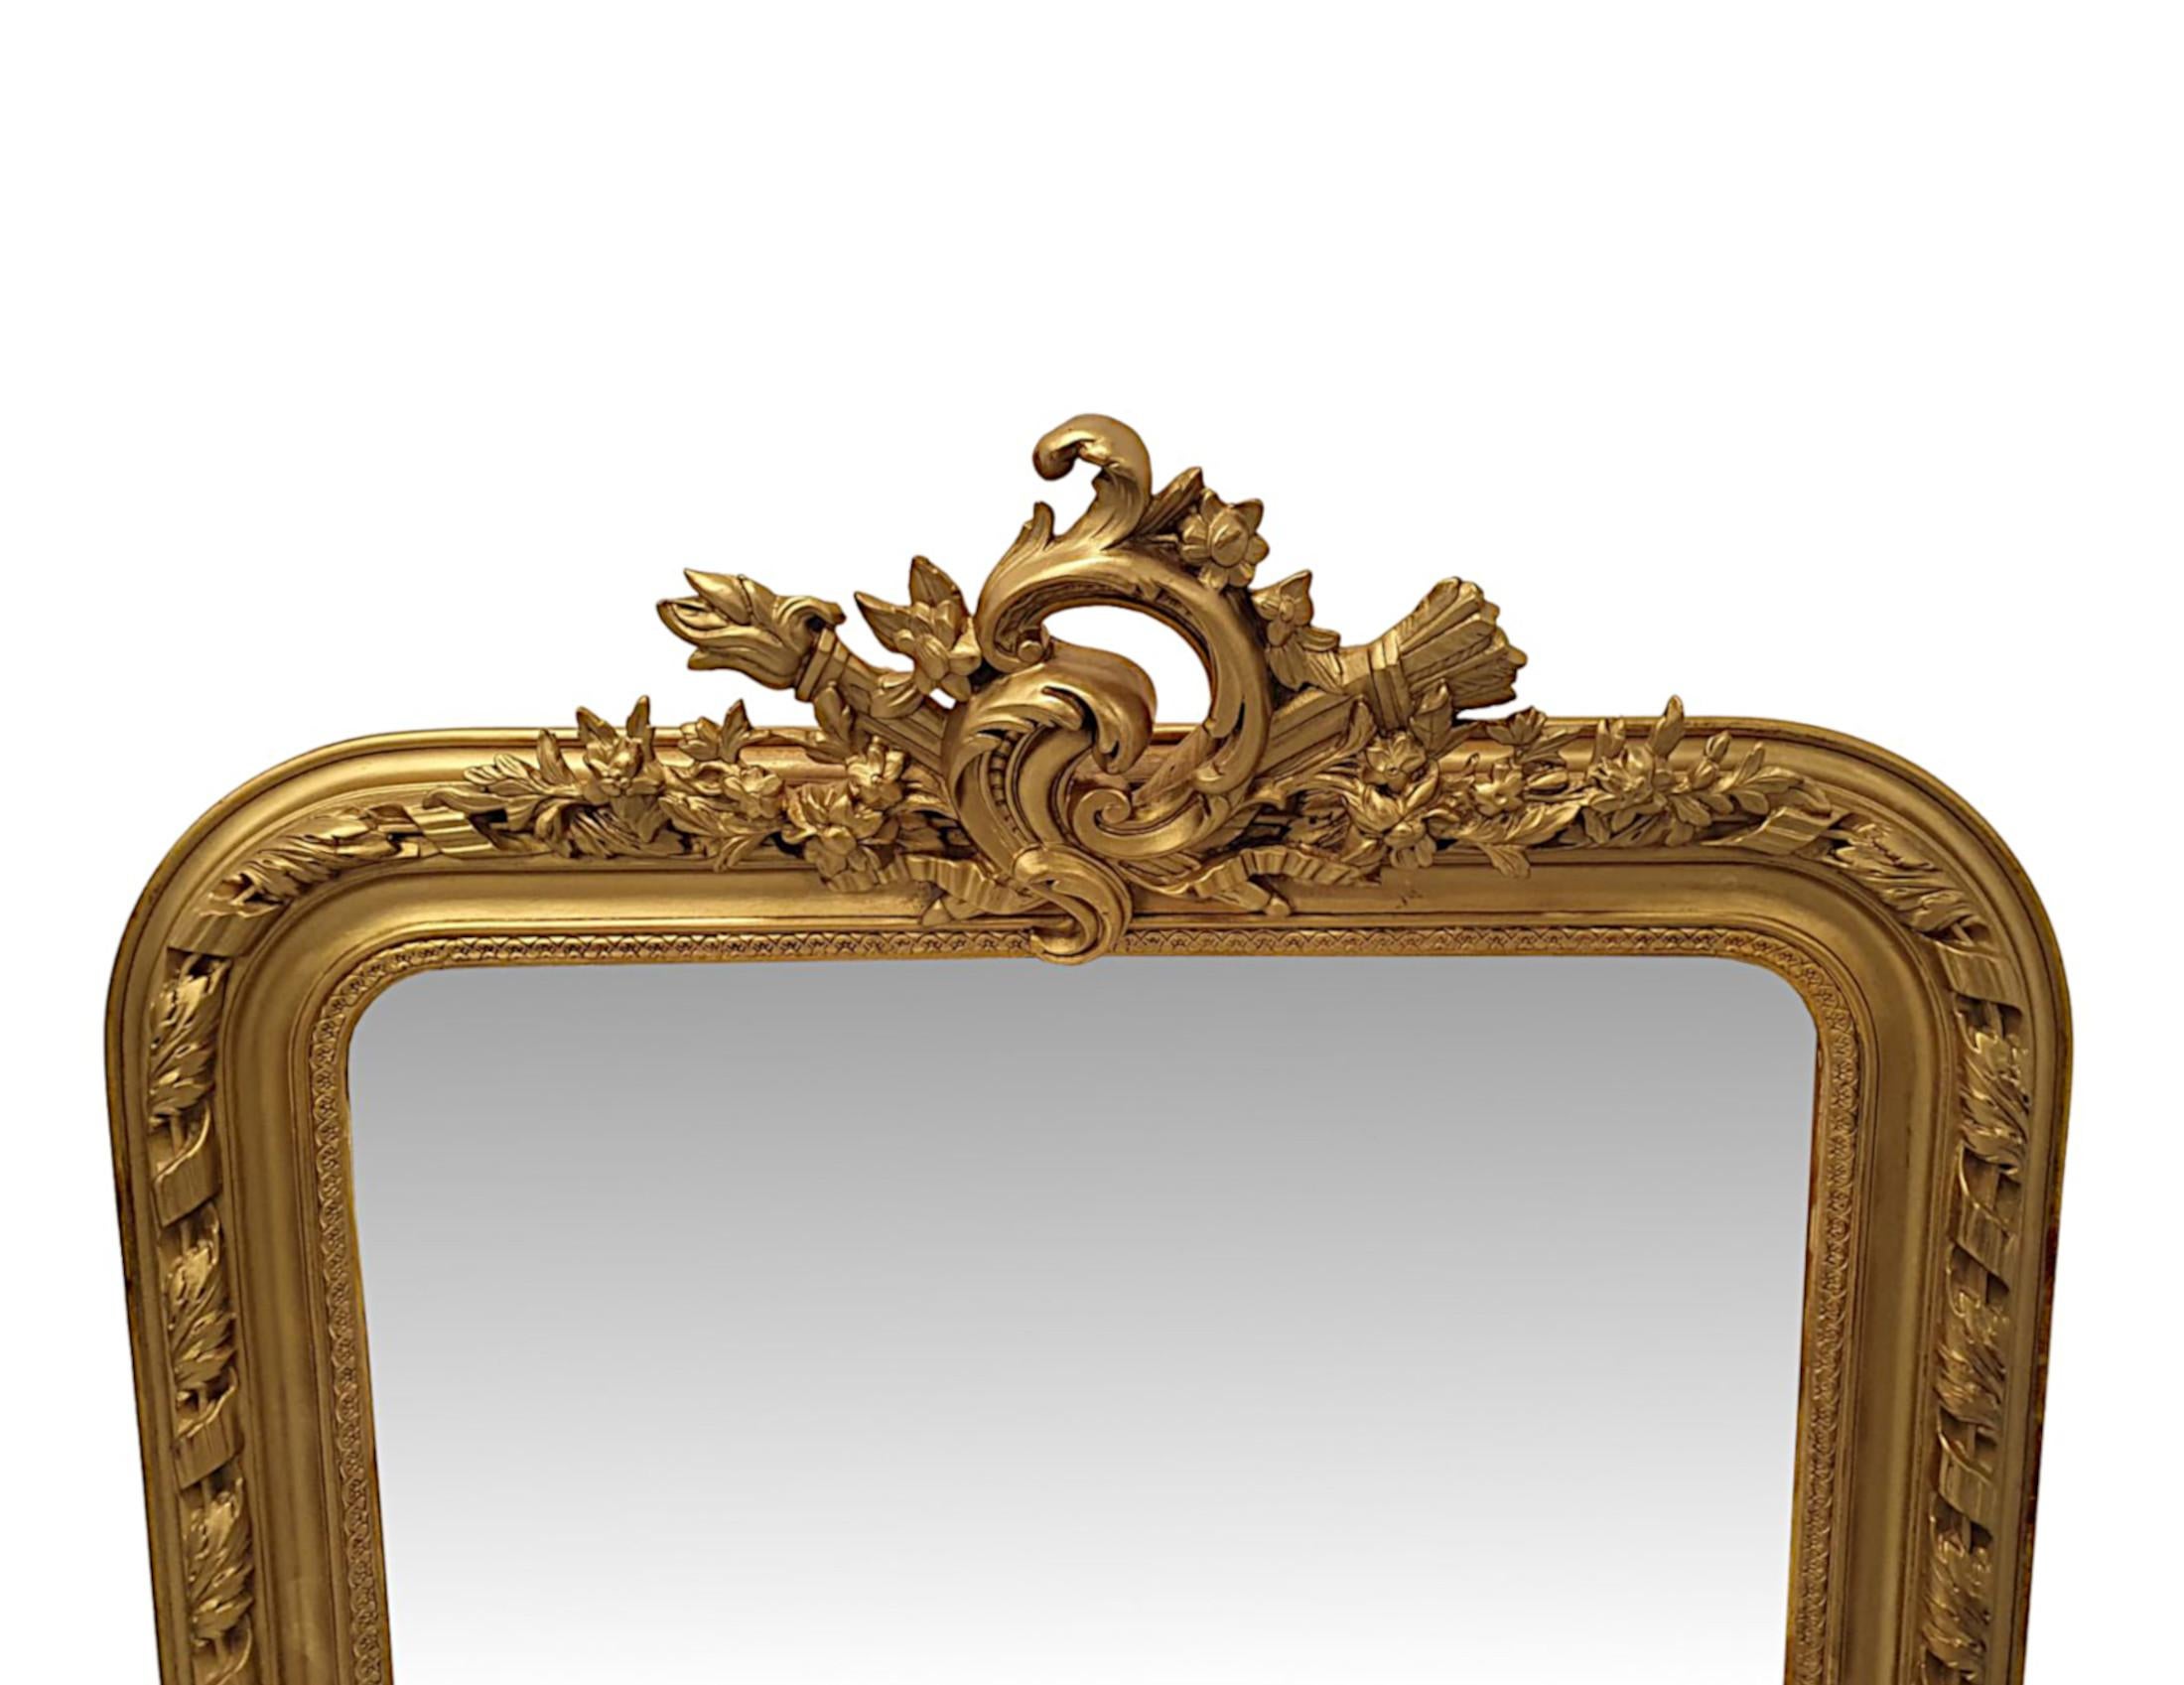 A very rare and fine pair of 19th century giltwood mirrors. The mirror glass plate is set within a beautifully hand carved, moulded and shaped giltwood frame of rectangular form with ribbon, foliate, egg and dart border motif detail. Surmounted with